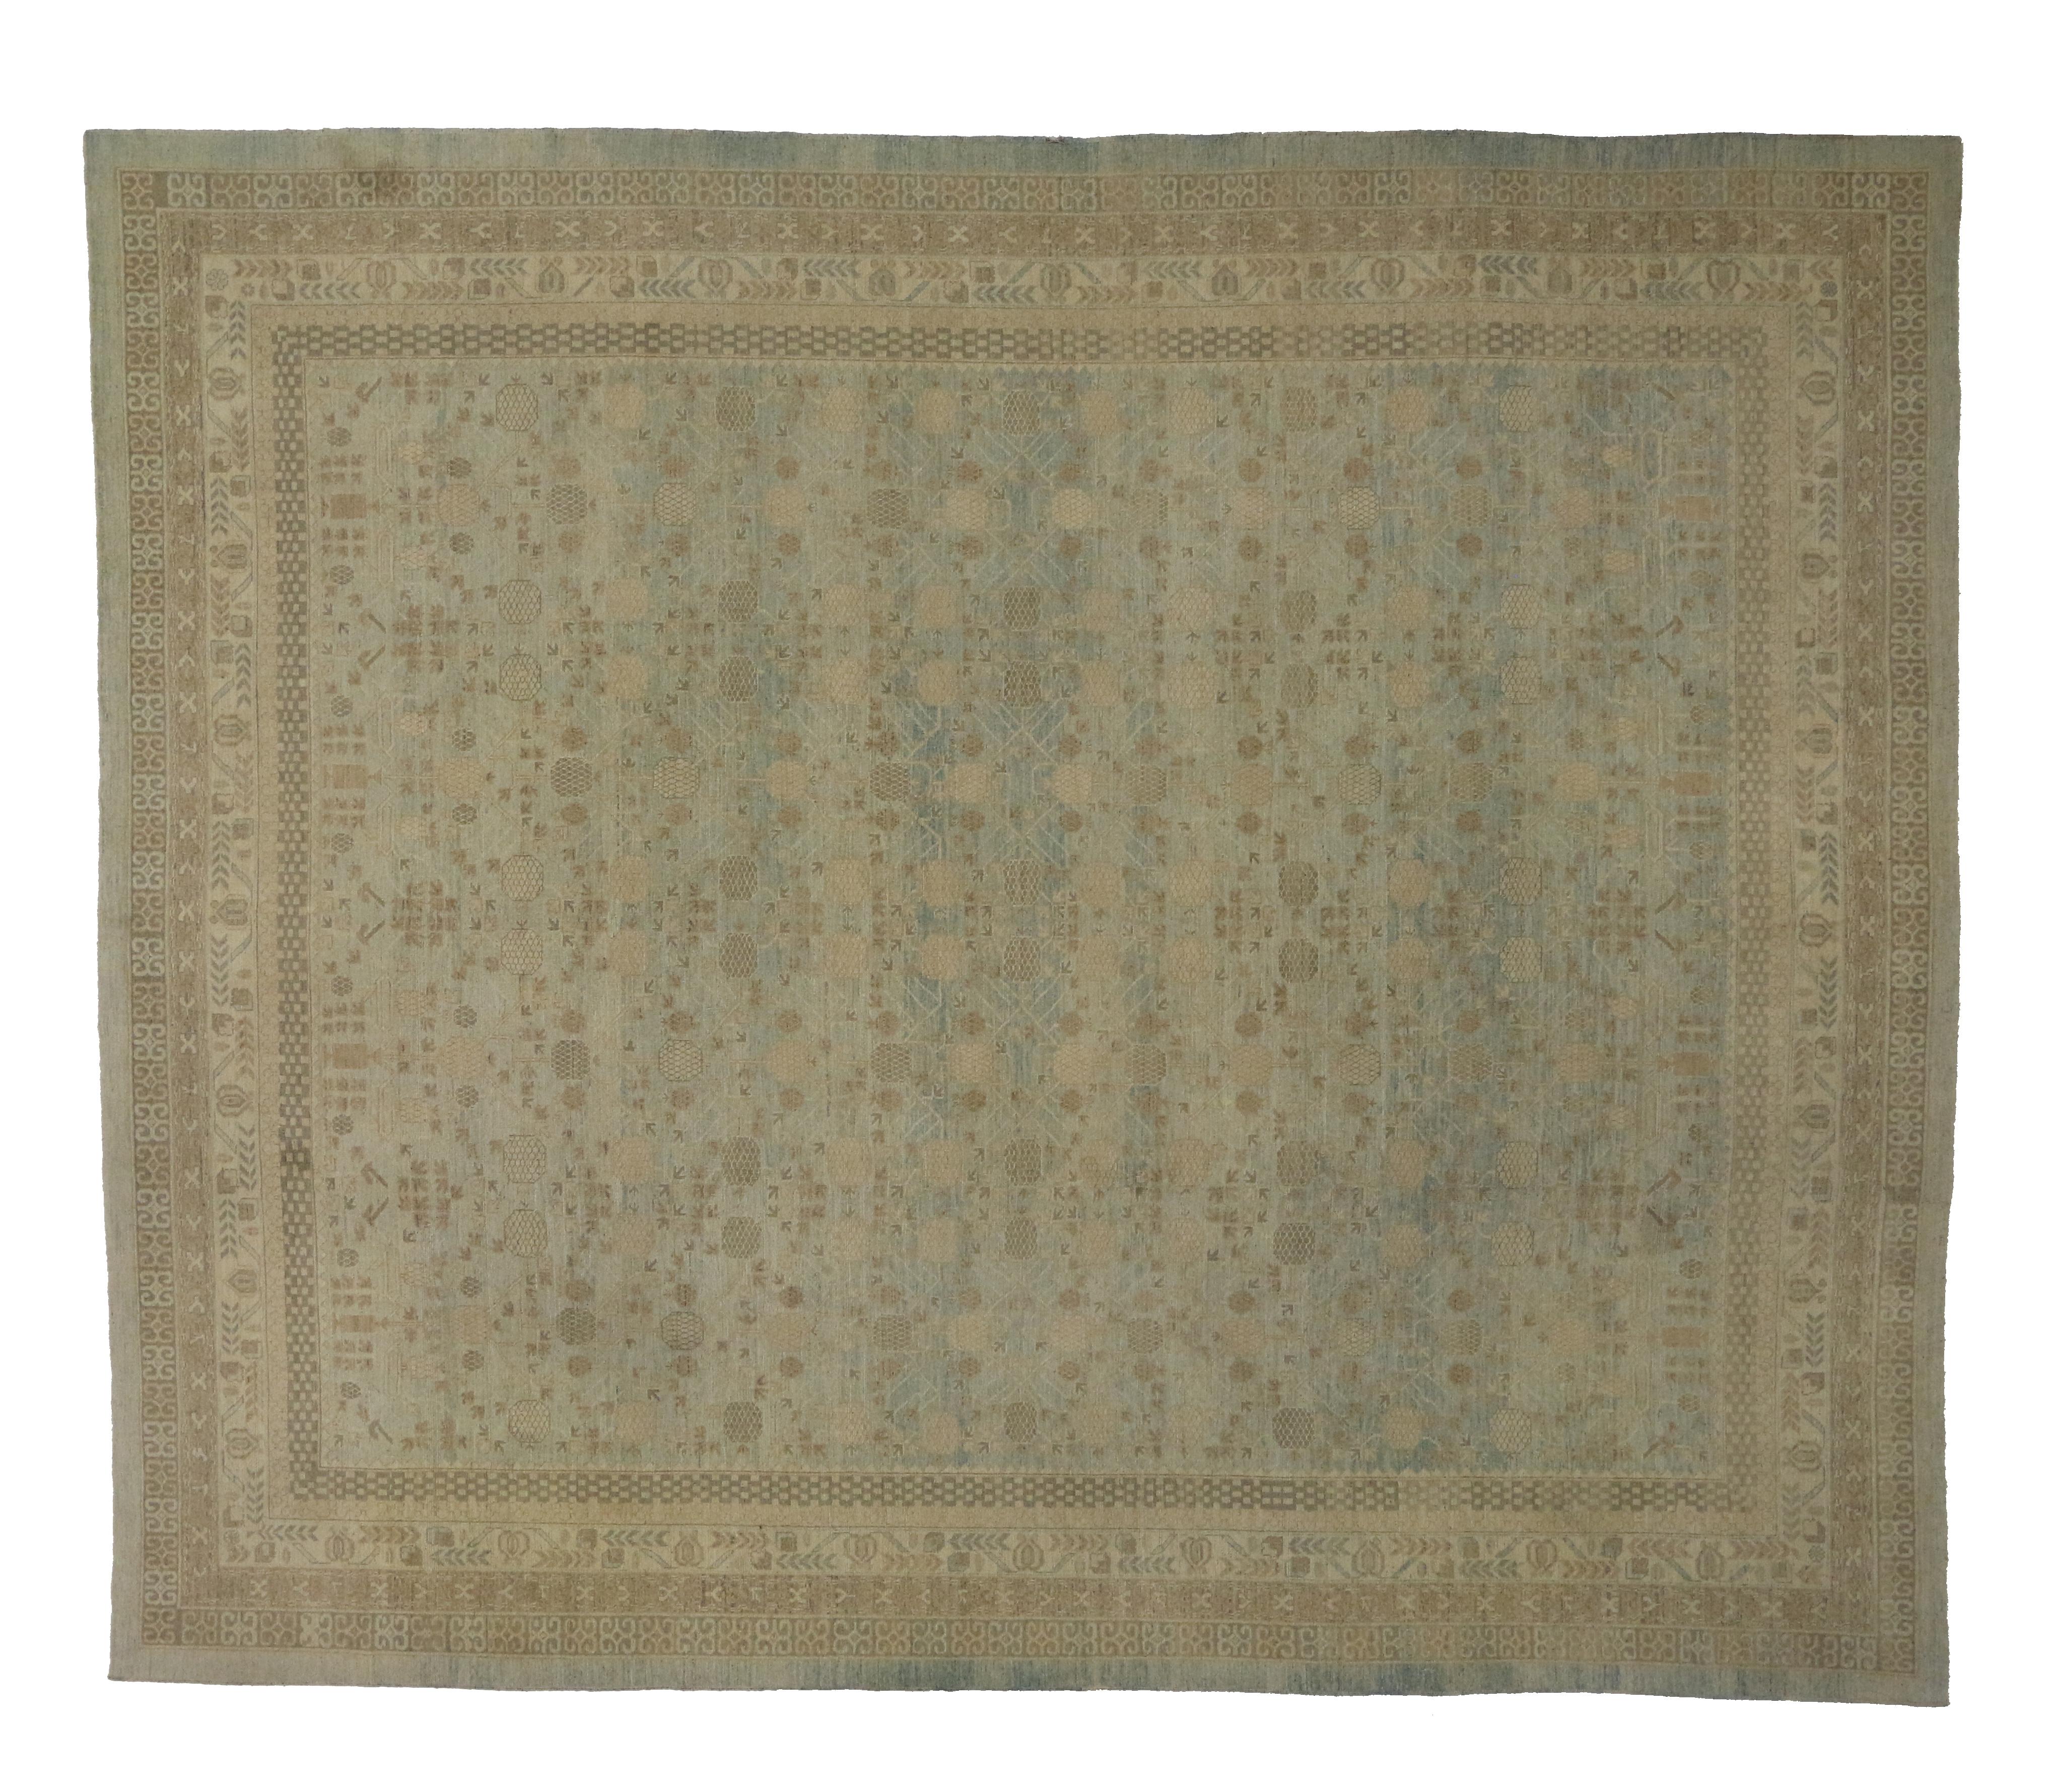 Hand-Knotted New Transitional Oversize Rug with Khotan Pomegranate Design, Coastal Colors